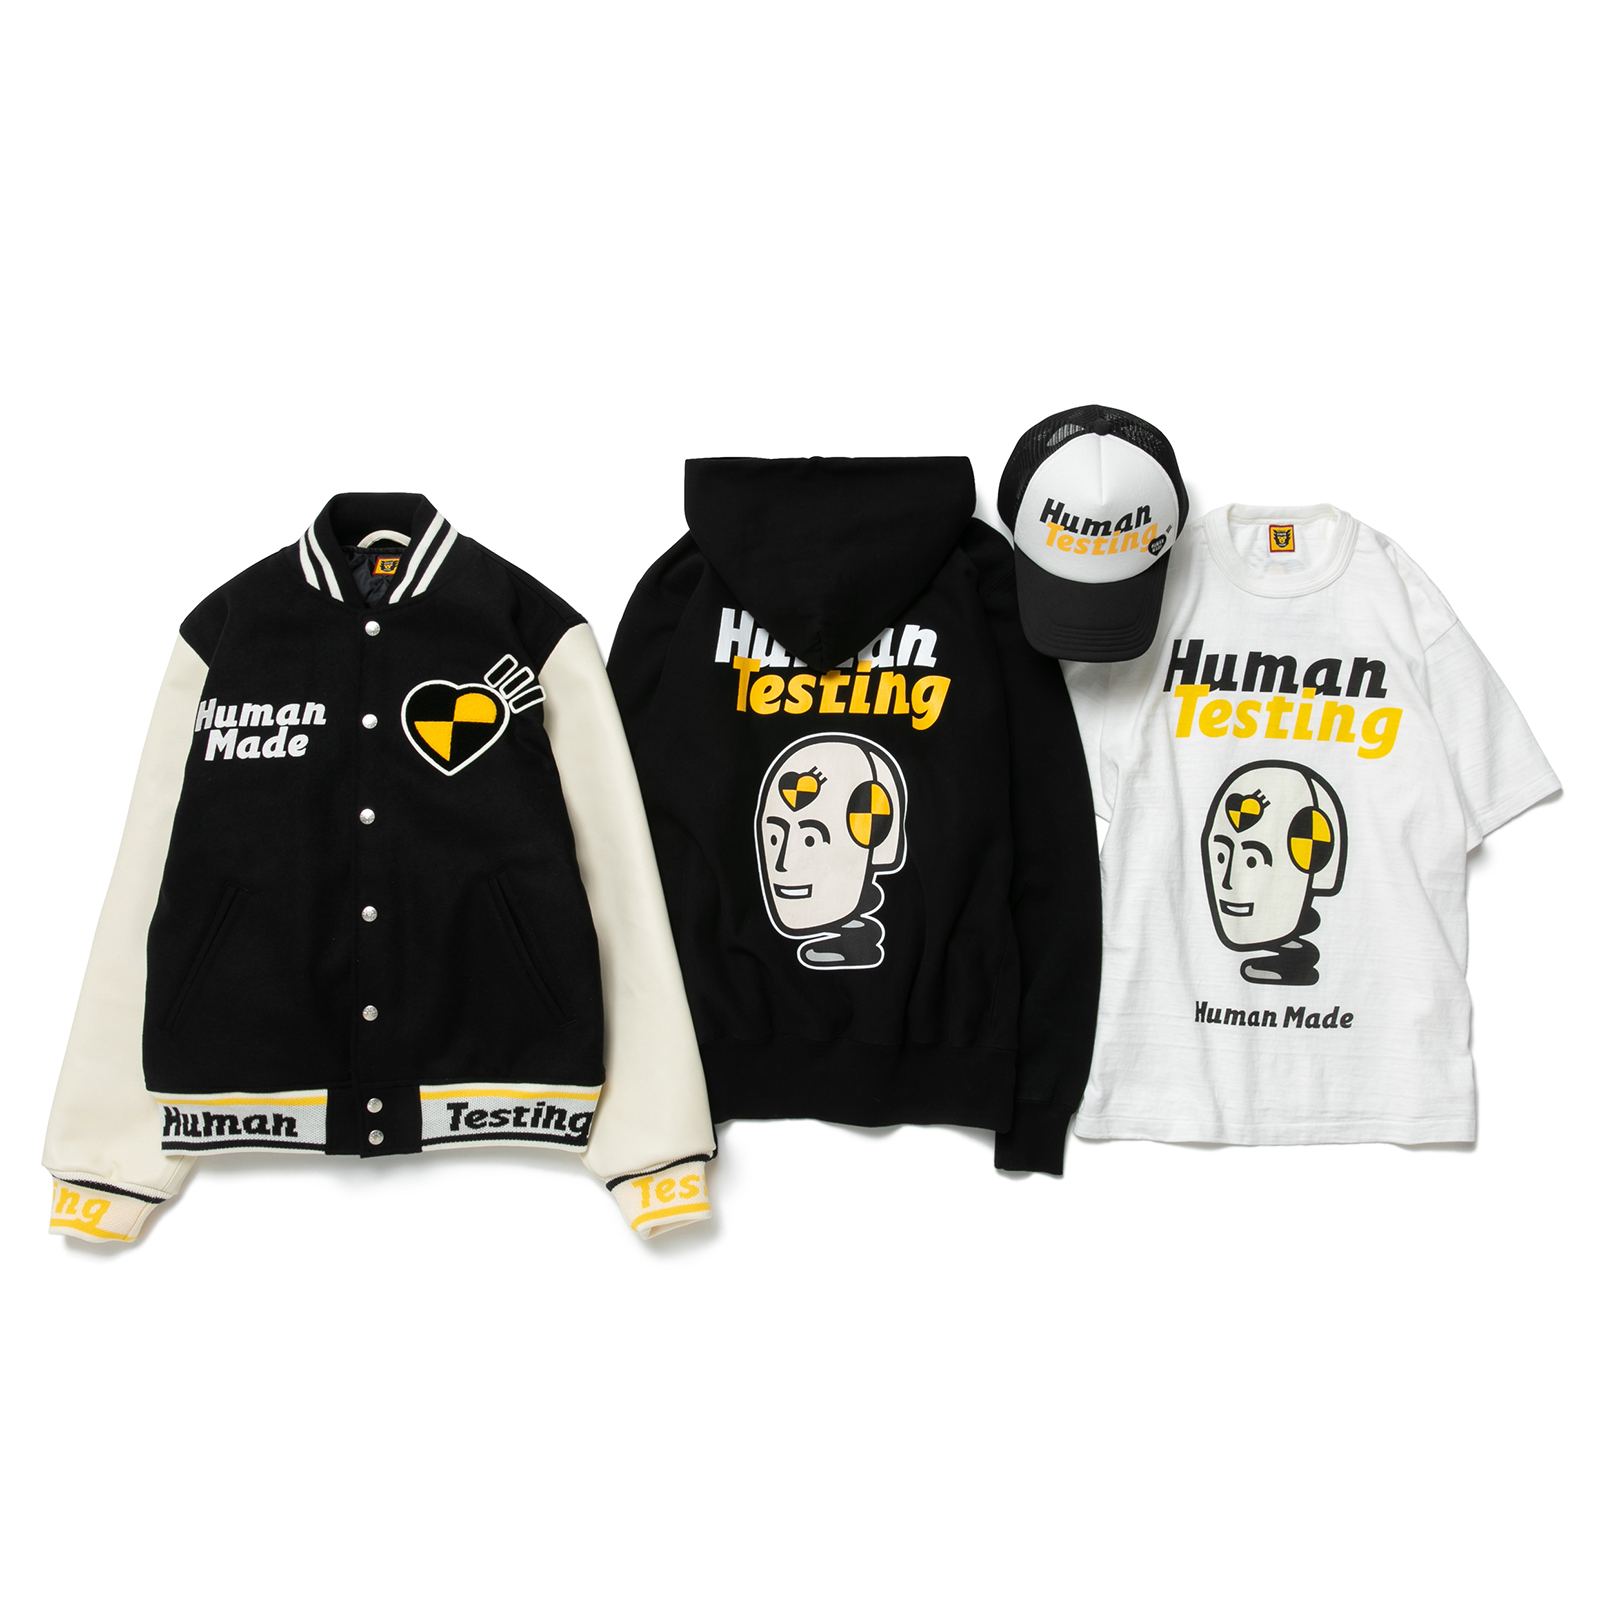 HUMAN MADE x A$AP Rocky “HUMAN TESTING” Collection